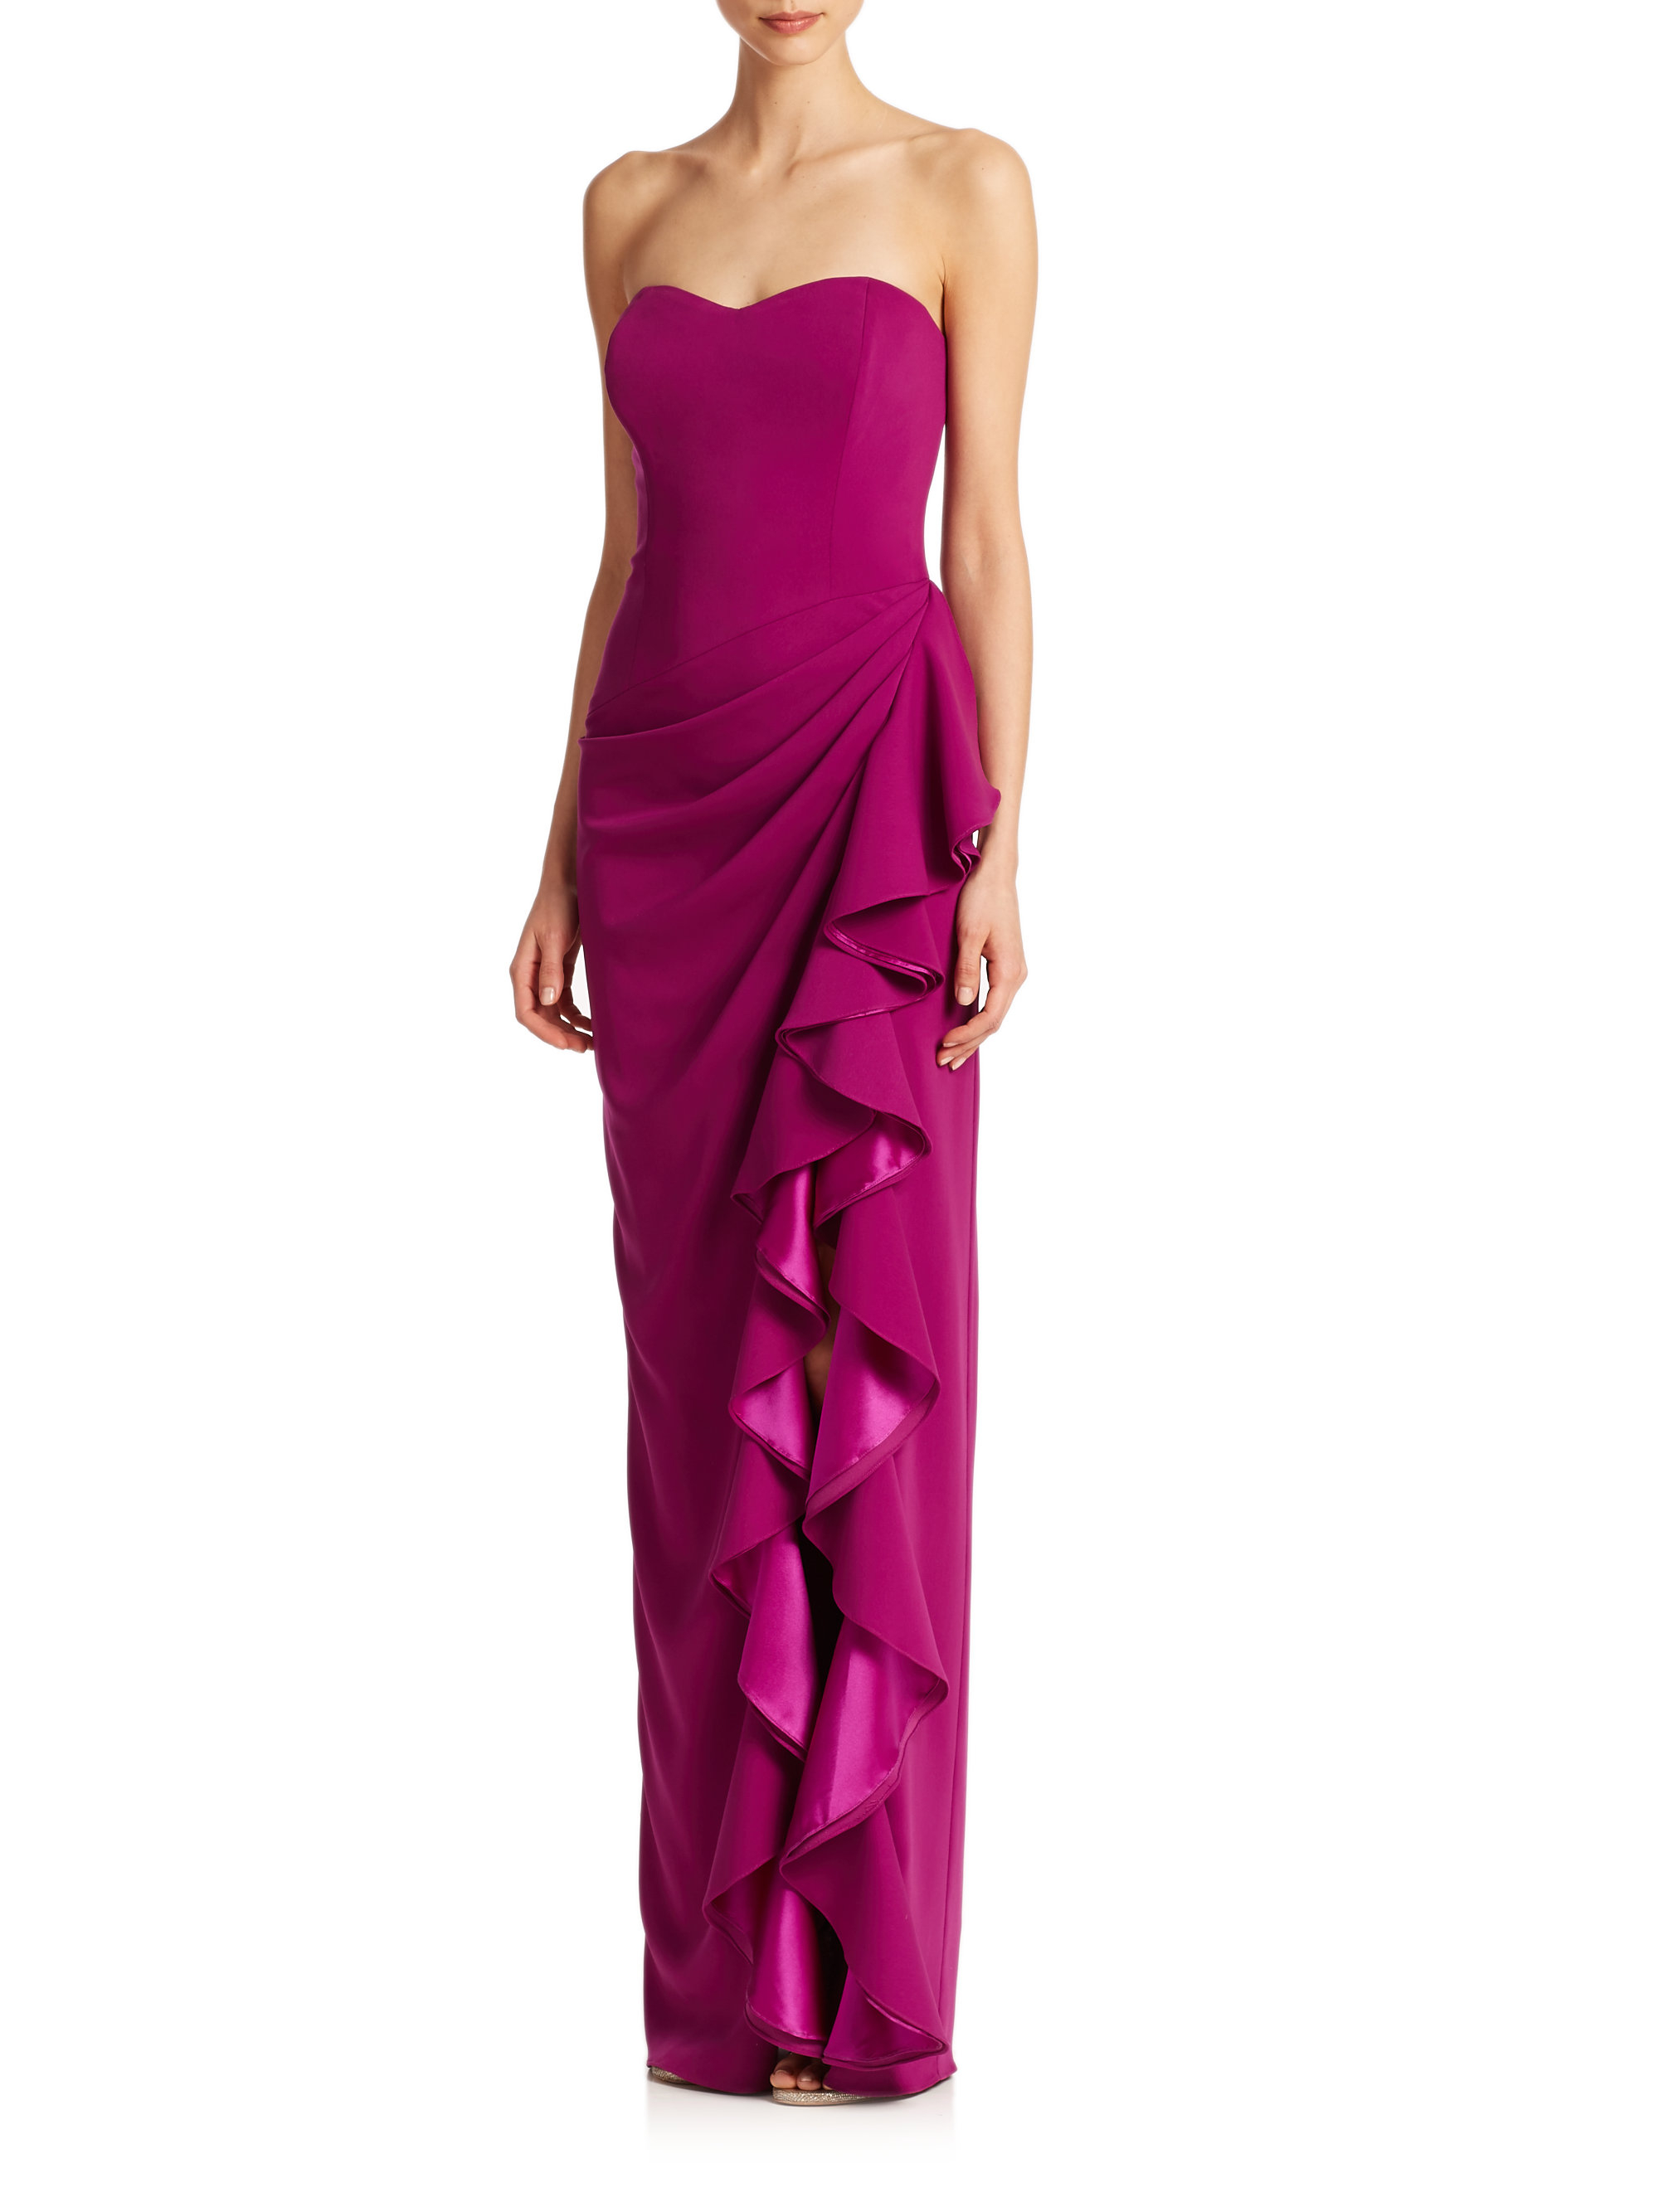 Badgley Mischka Synthetic Strapless Ruffled Gown in Purple - Lyst